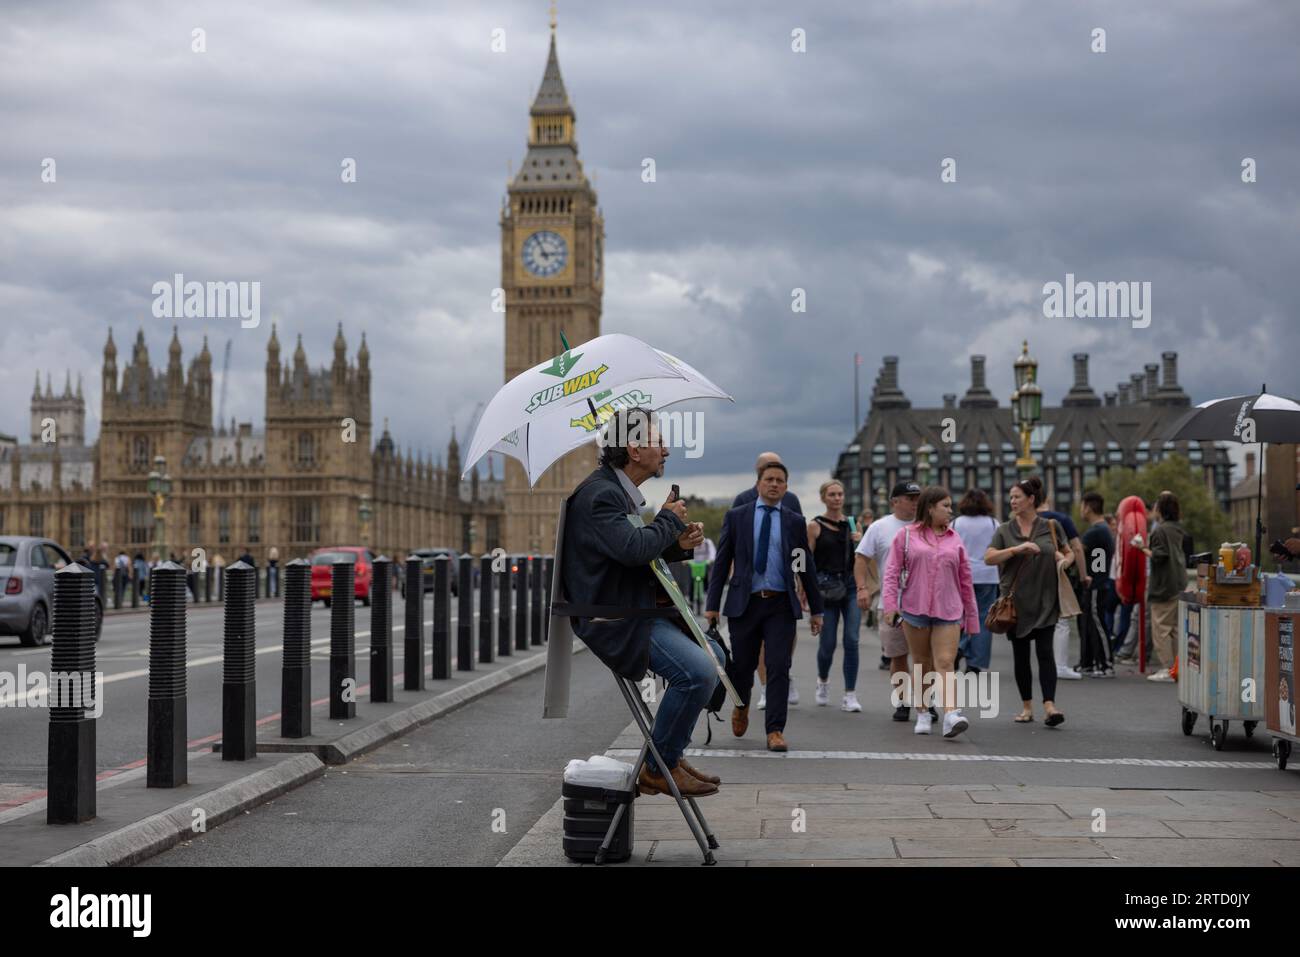 Man sitting on a folding chair promoting and giving directions to Subway fast food restaurant, Westminster Bridge, London, England, UK Stock Photo